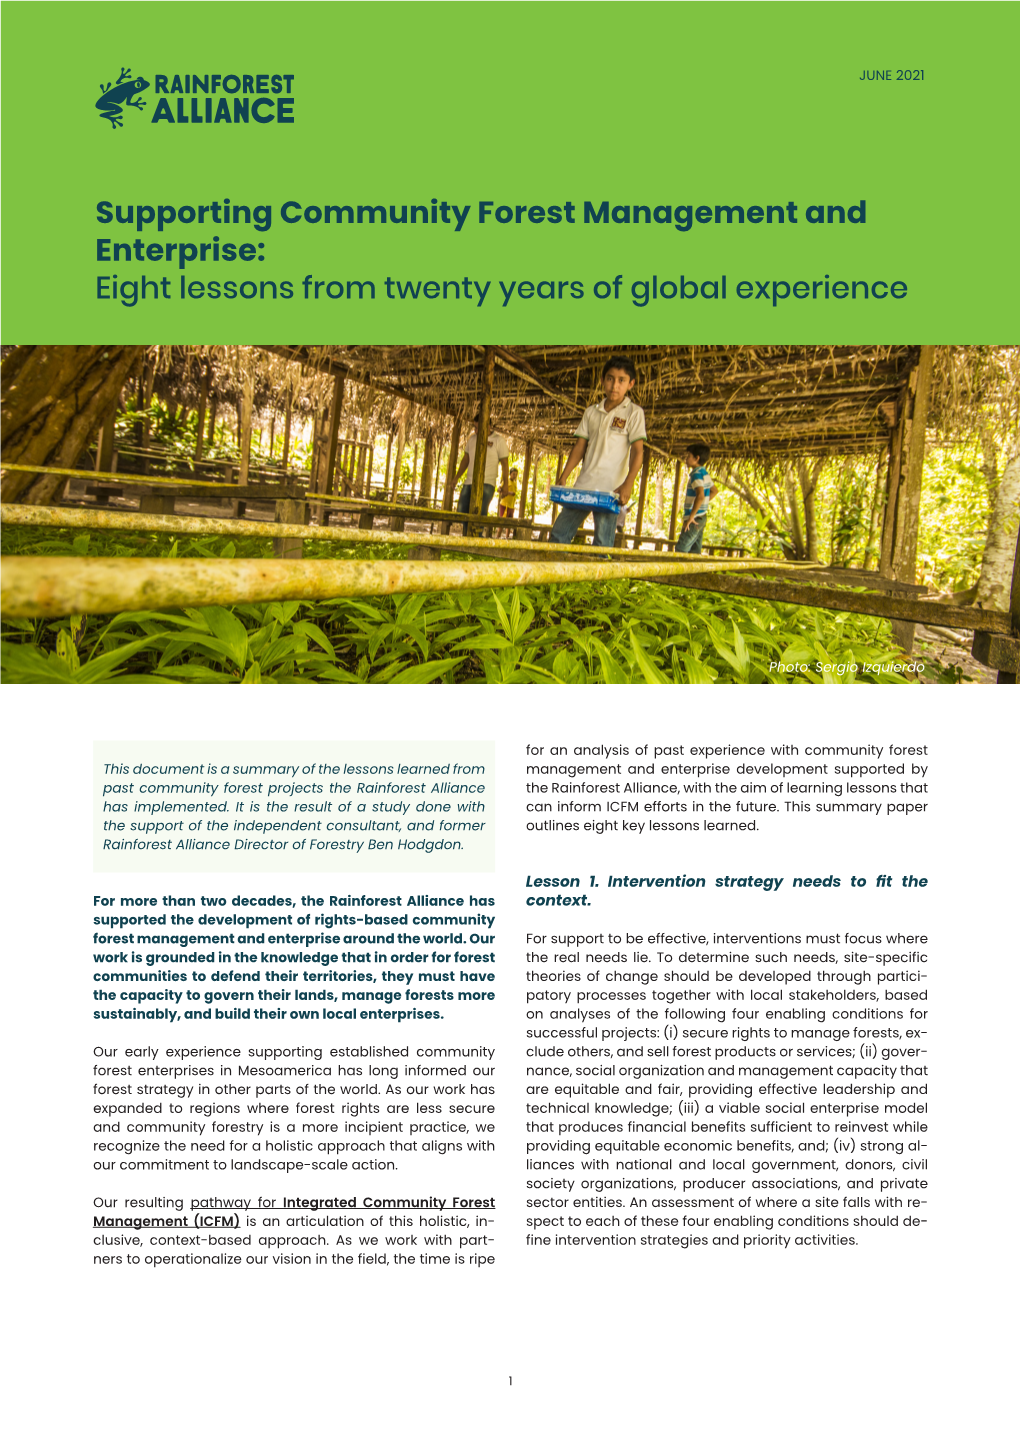 Supporting Community Forest Management and Enterprise: Eight Lessons from Twenty Years of Global Experience